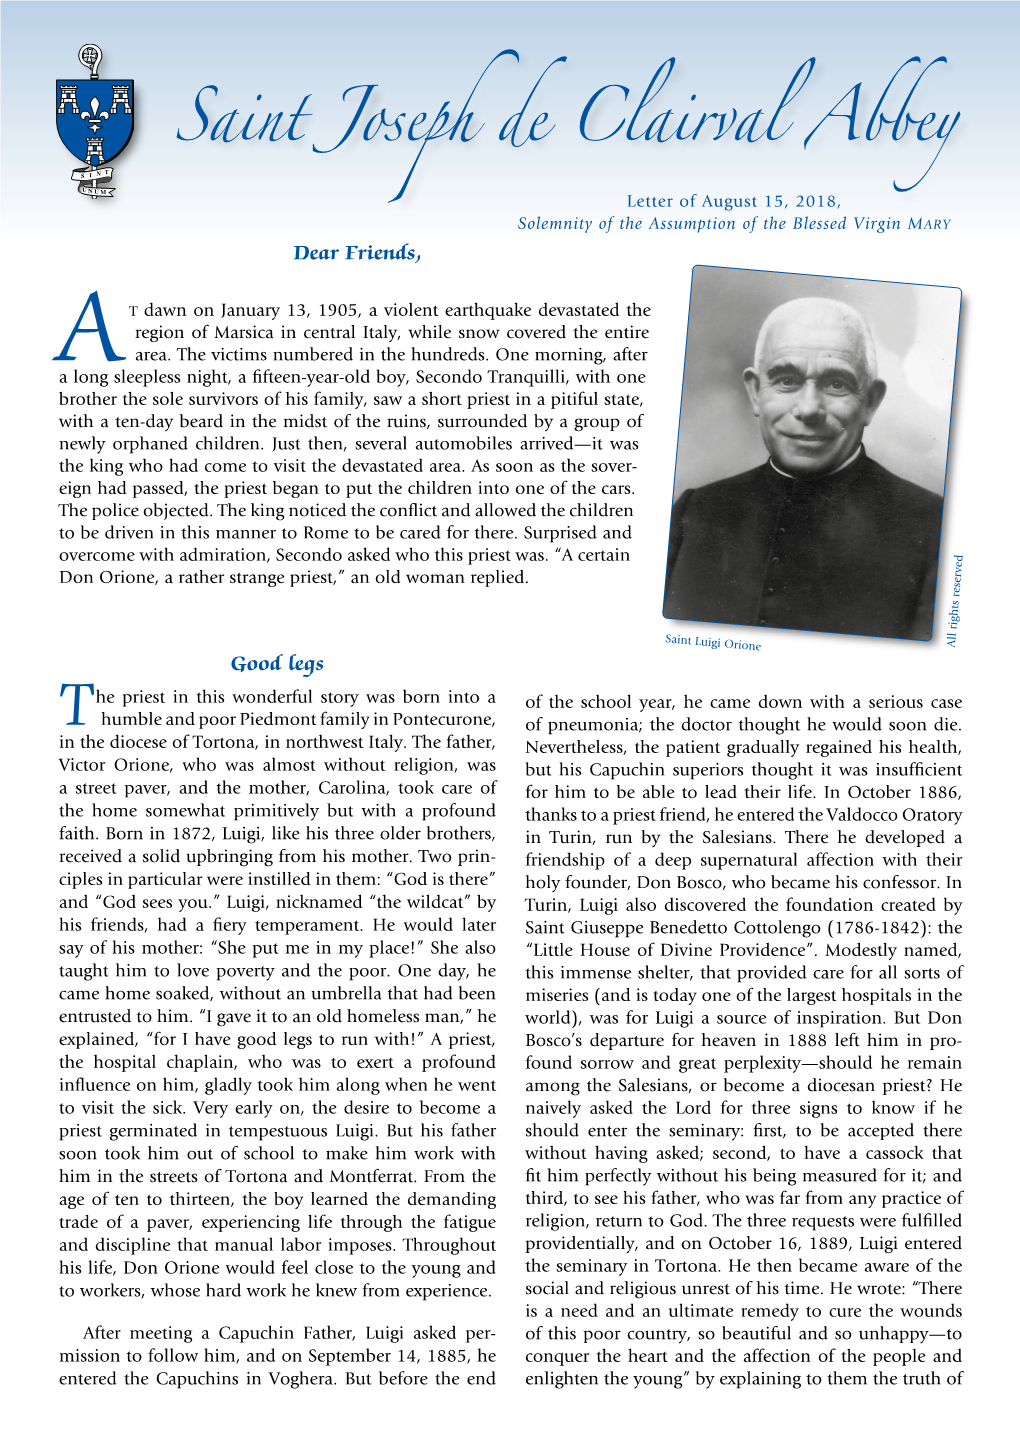 Saint Joseph De Clairval Abbey Newsletter (Free of Charge), Contact the Abbey